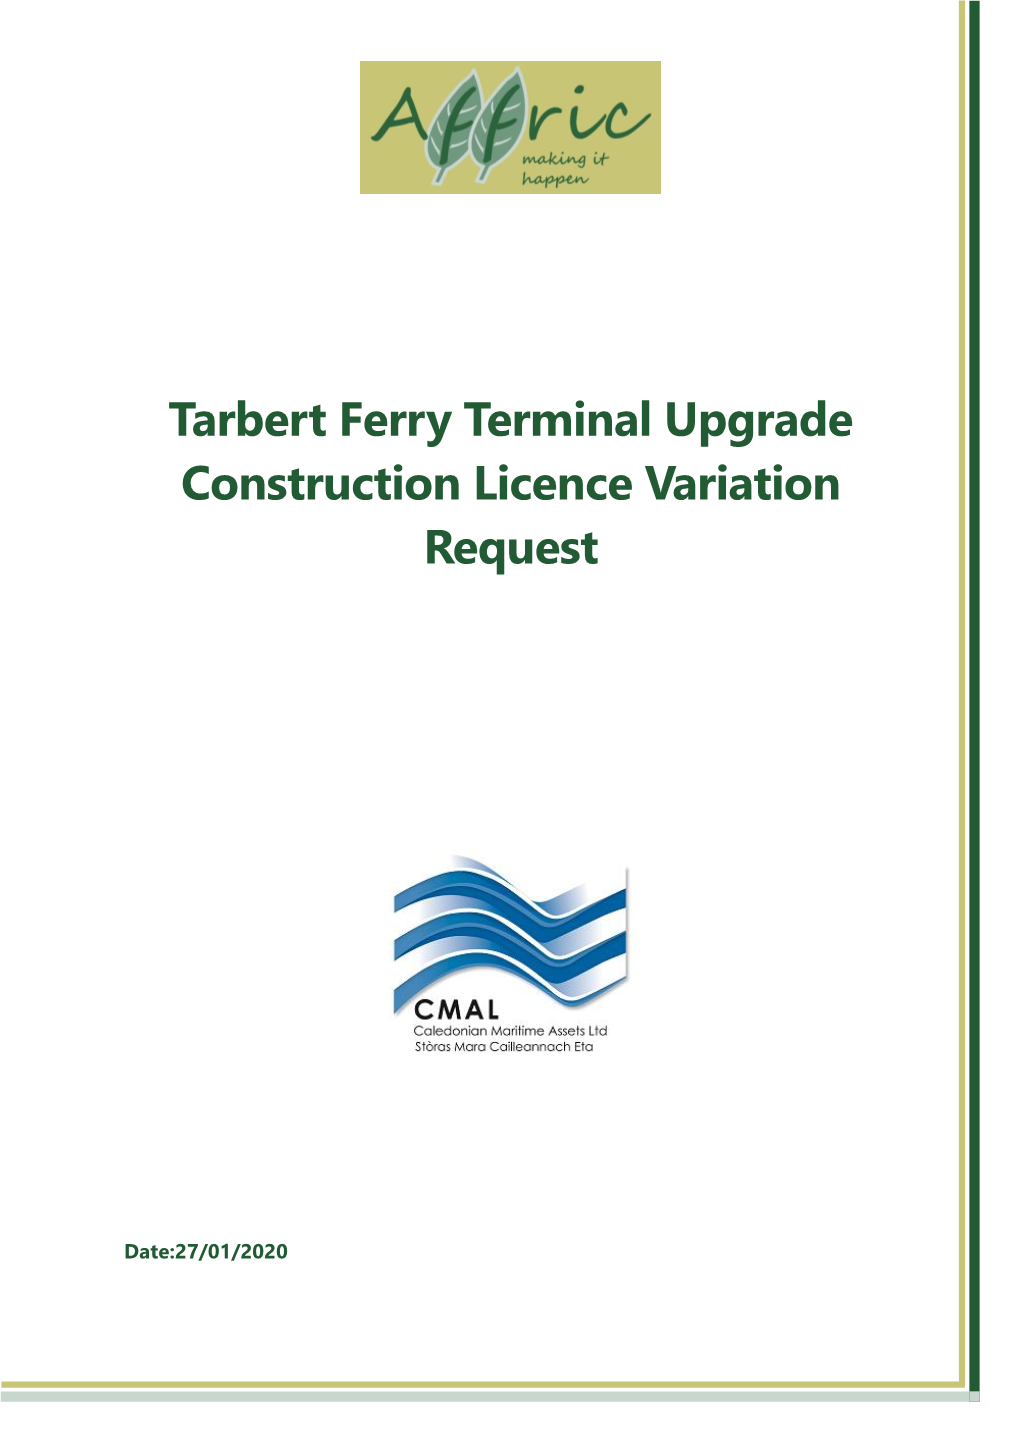 Tarbert Ferry Terminal Upgrade Construction Licence Variation Request